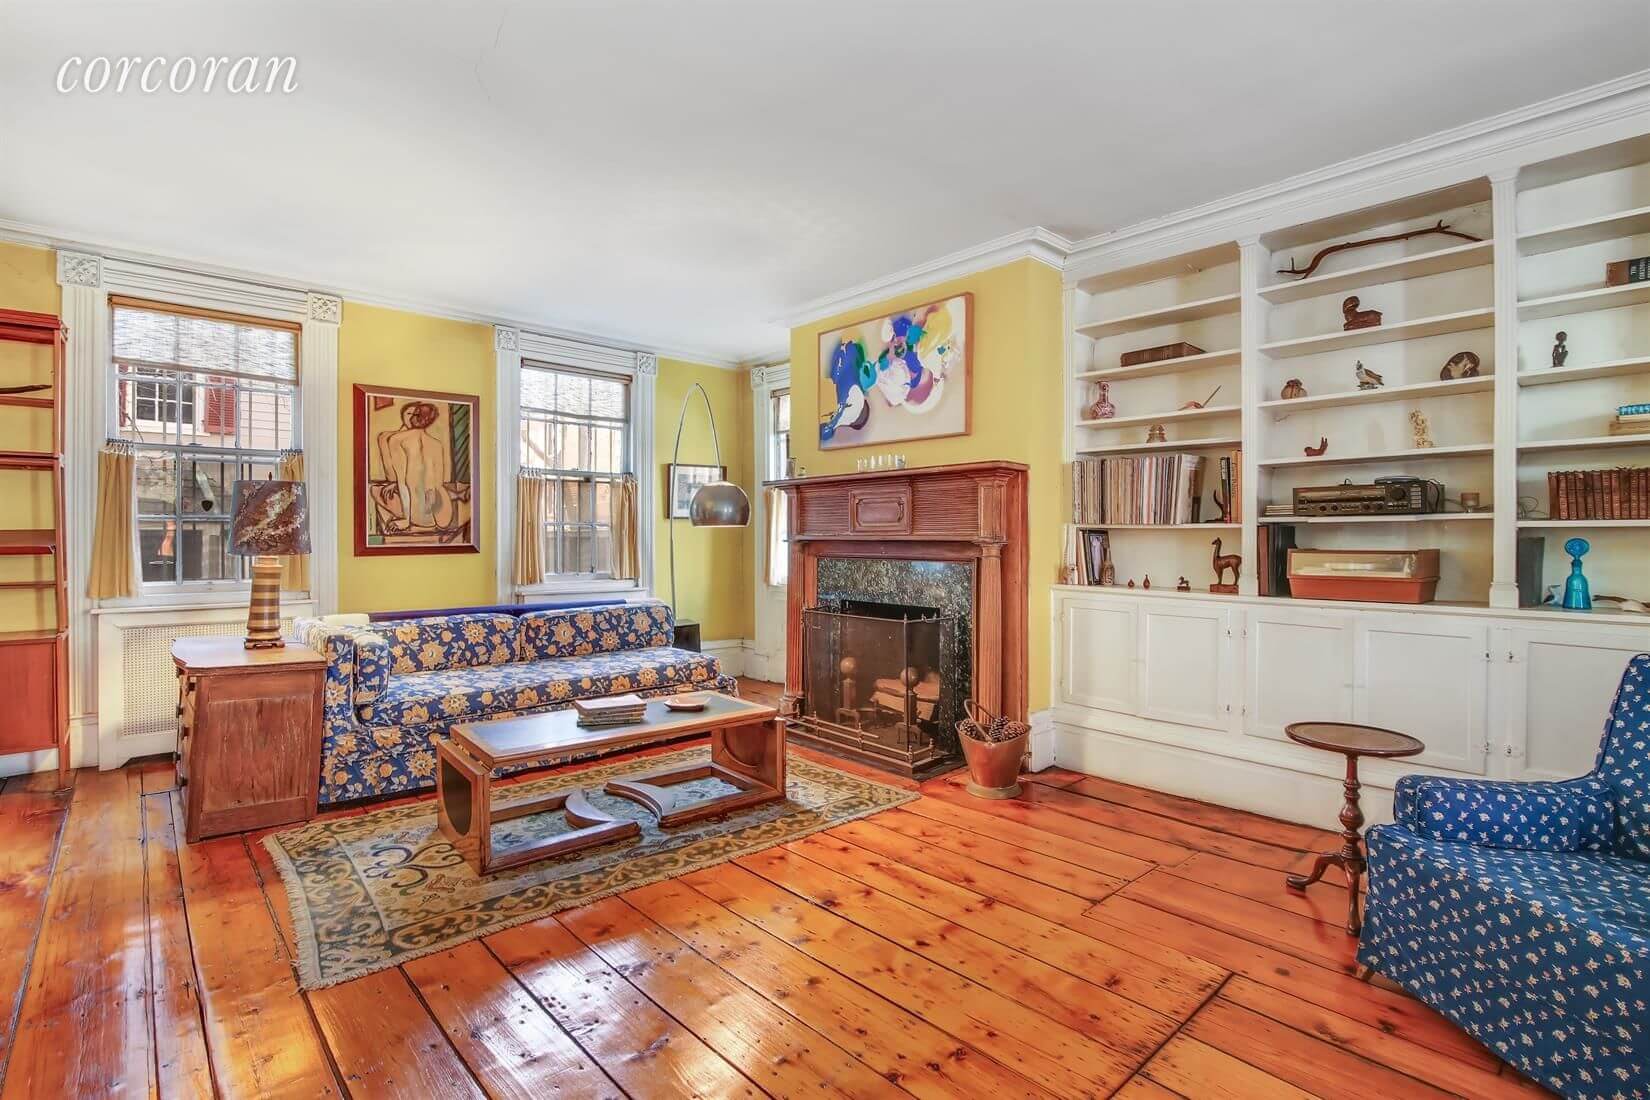 Brooklyn Homes for Sale in Brooklyn Heights at 24 Middagh Street